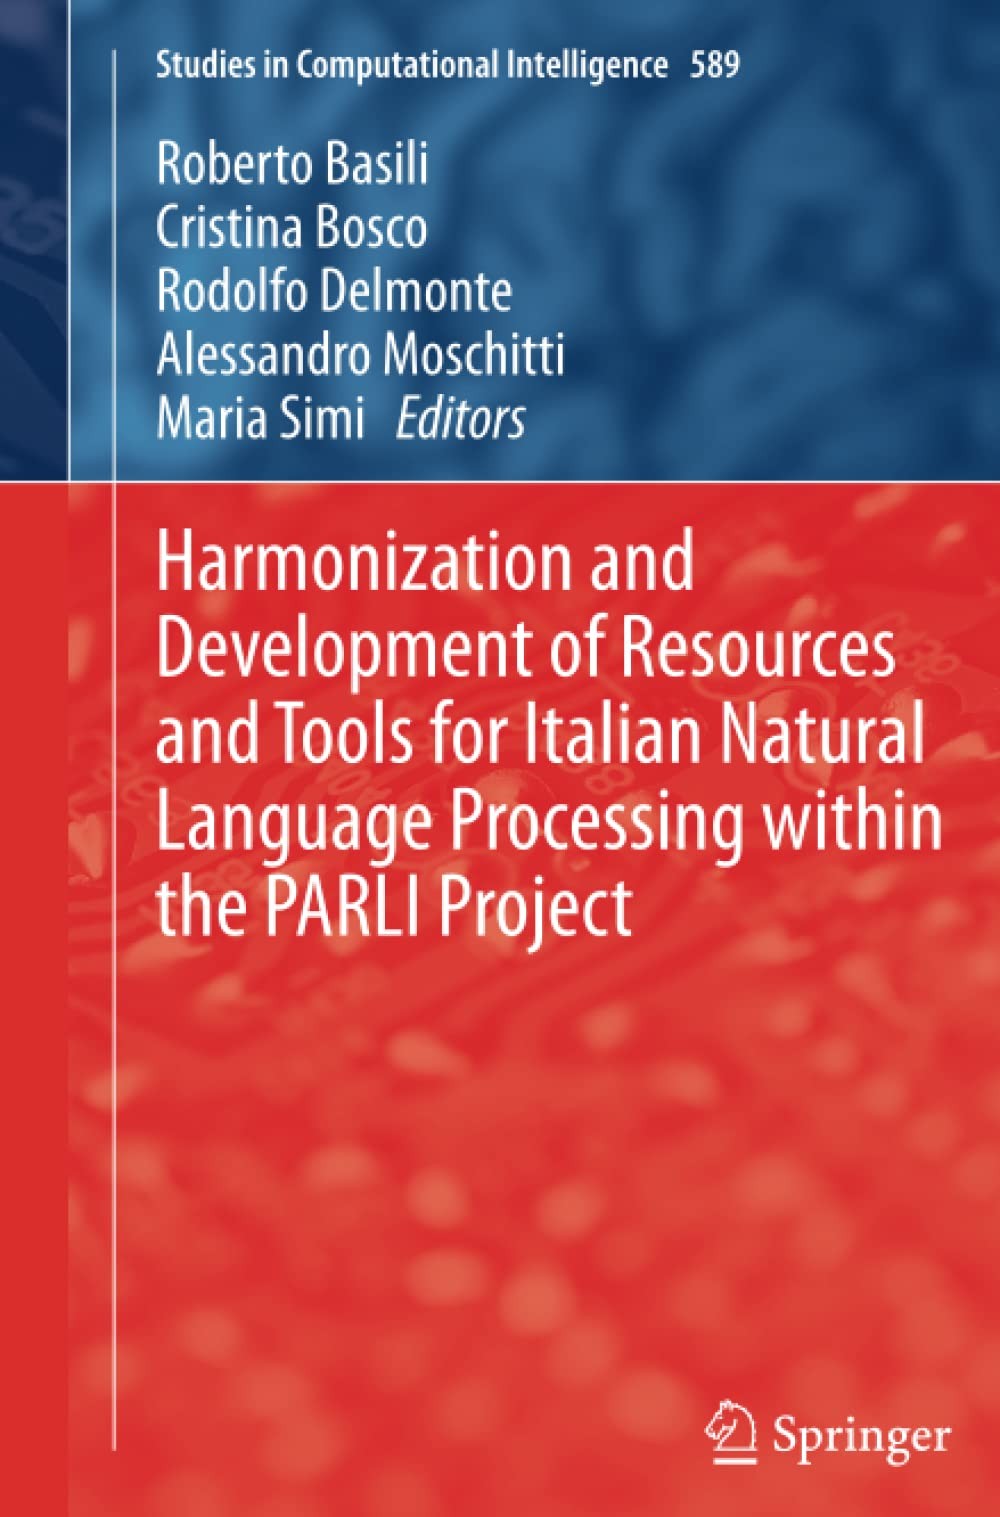 Harmonization and Development of Resources and Tools for Italian Natural Language Processing within the PARLI Project